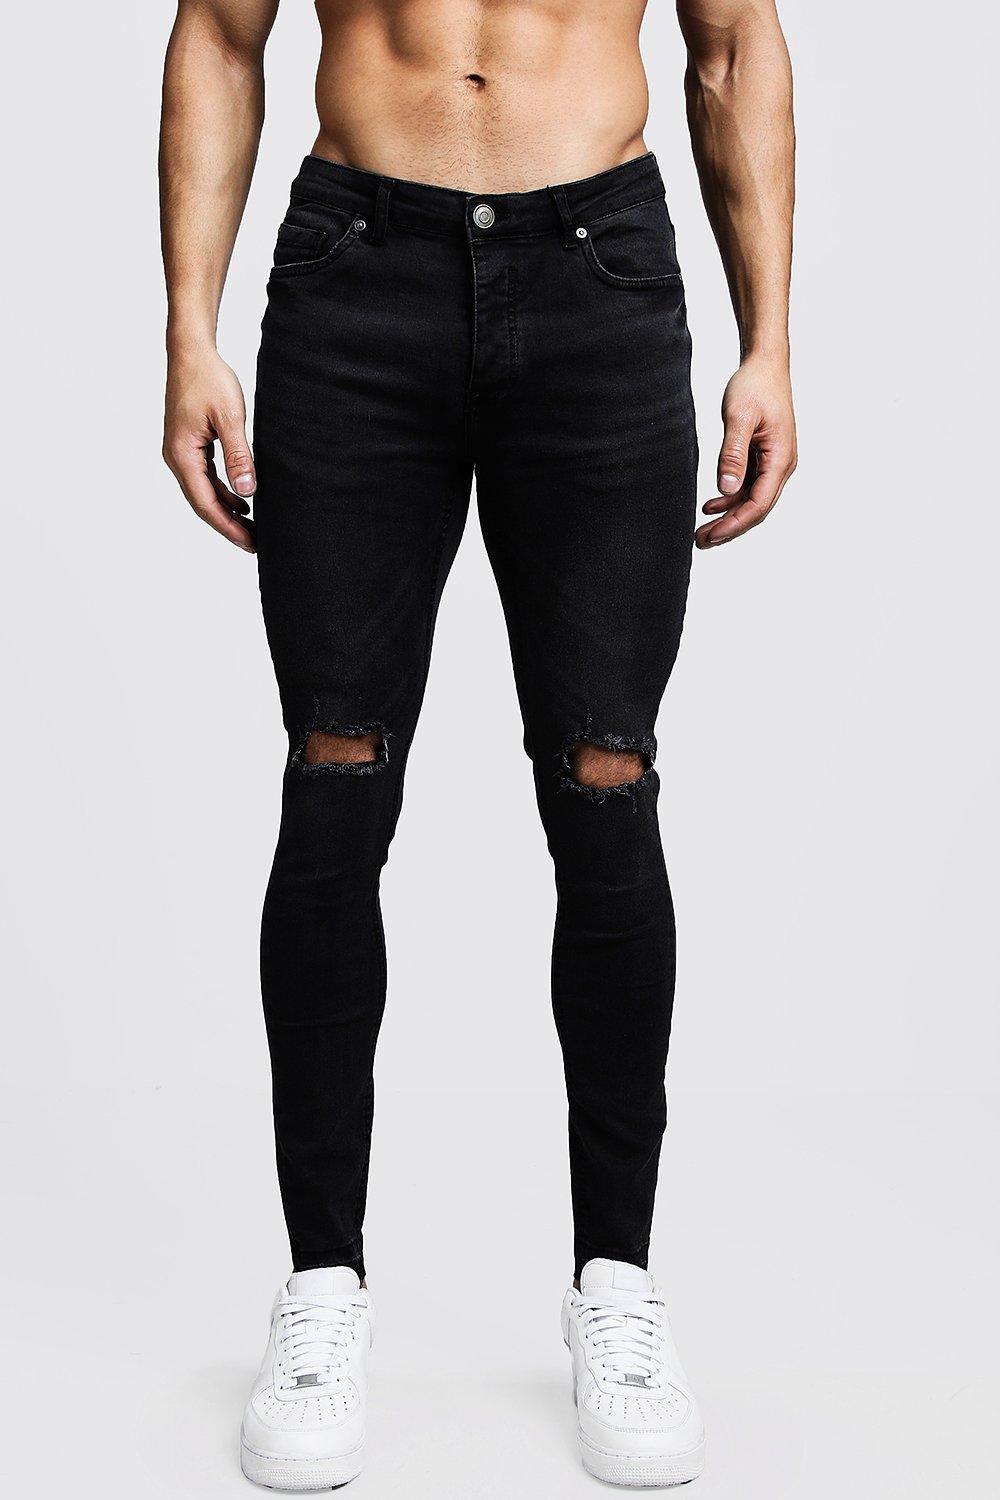 black skinny jeans with rips